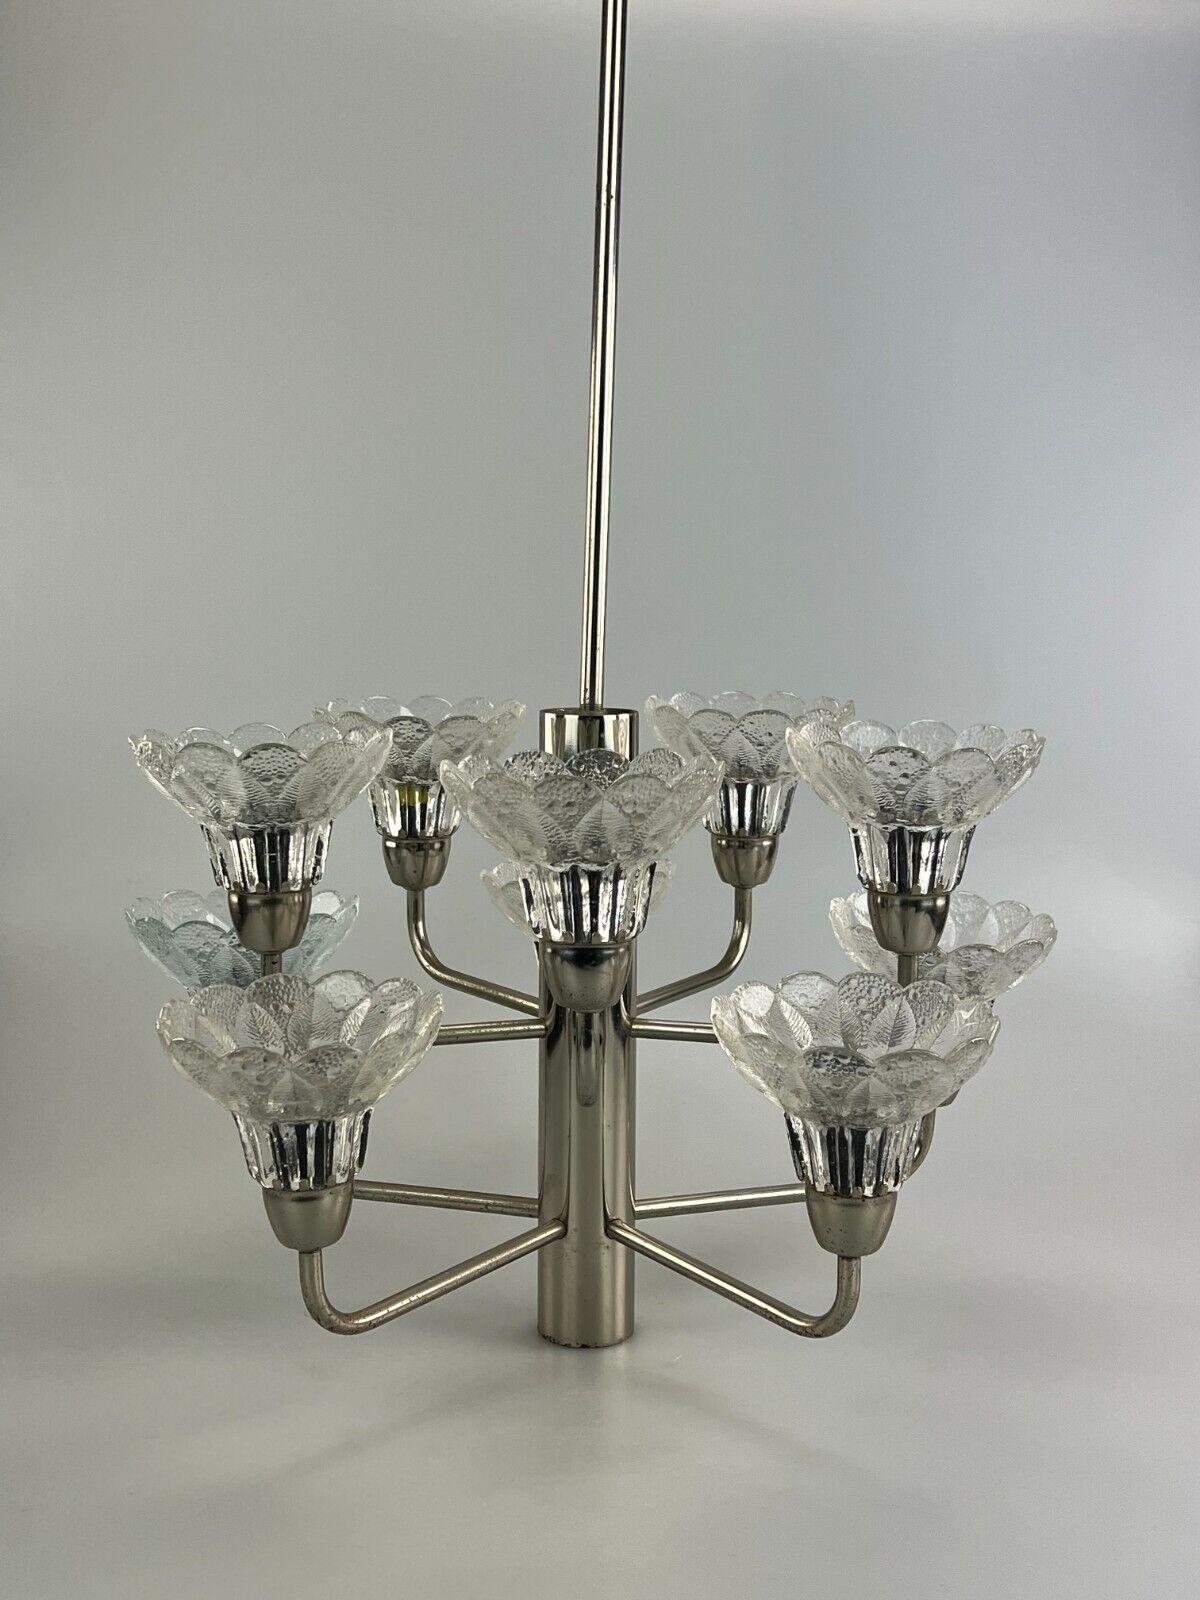 German 60s 70s Lamp Fixture Chandelier Glass Space Age Design For Sale